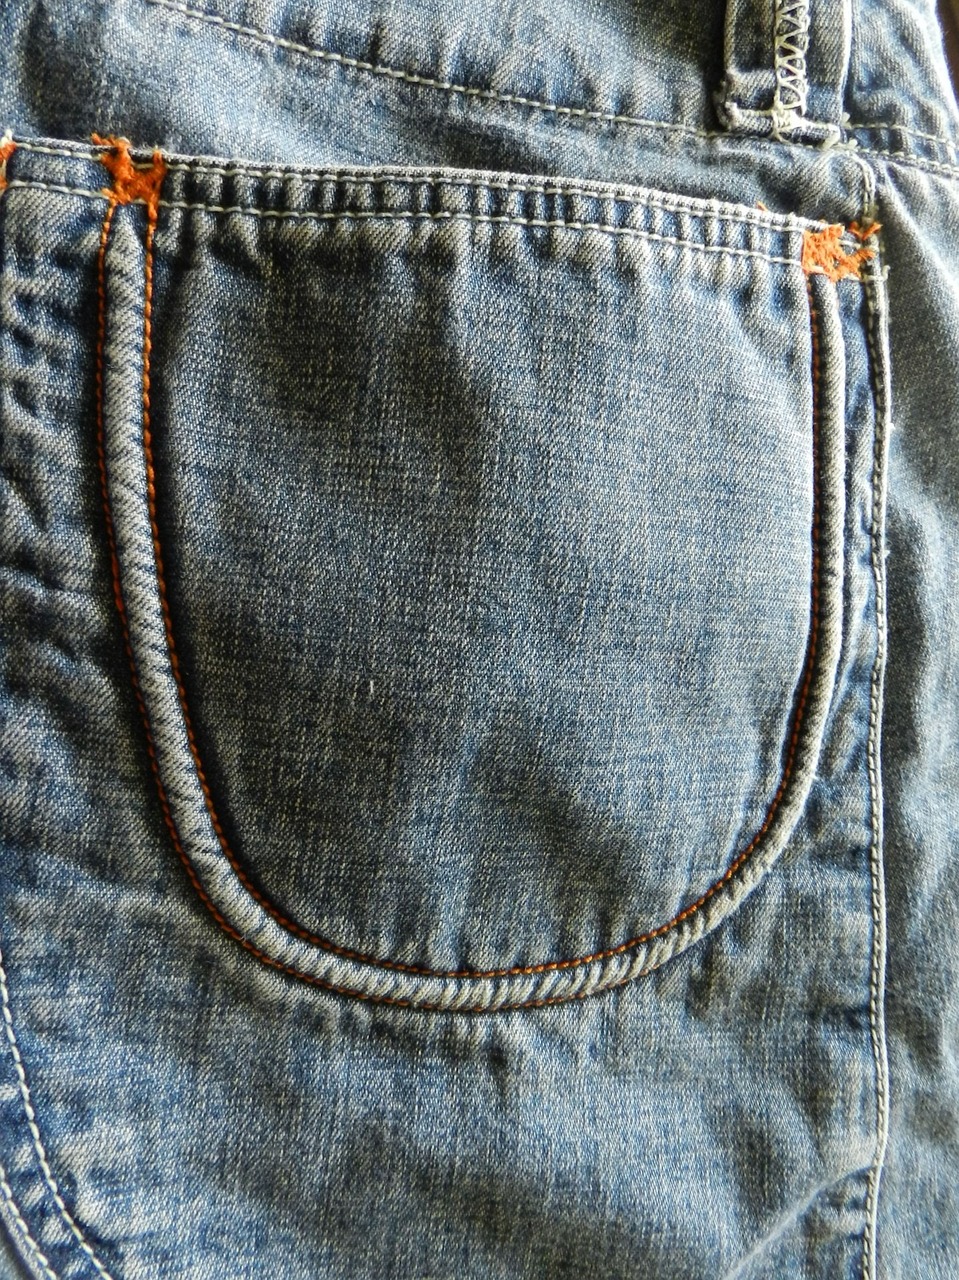 the back pocket of a pair of jeans, a macro photograph, sōsaku hanga, blue!! with orange details, half body photo, uncut, visible stitching